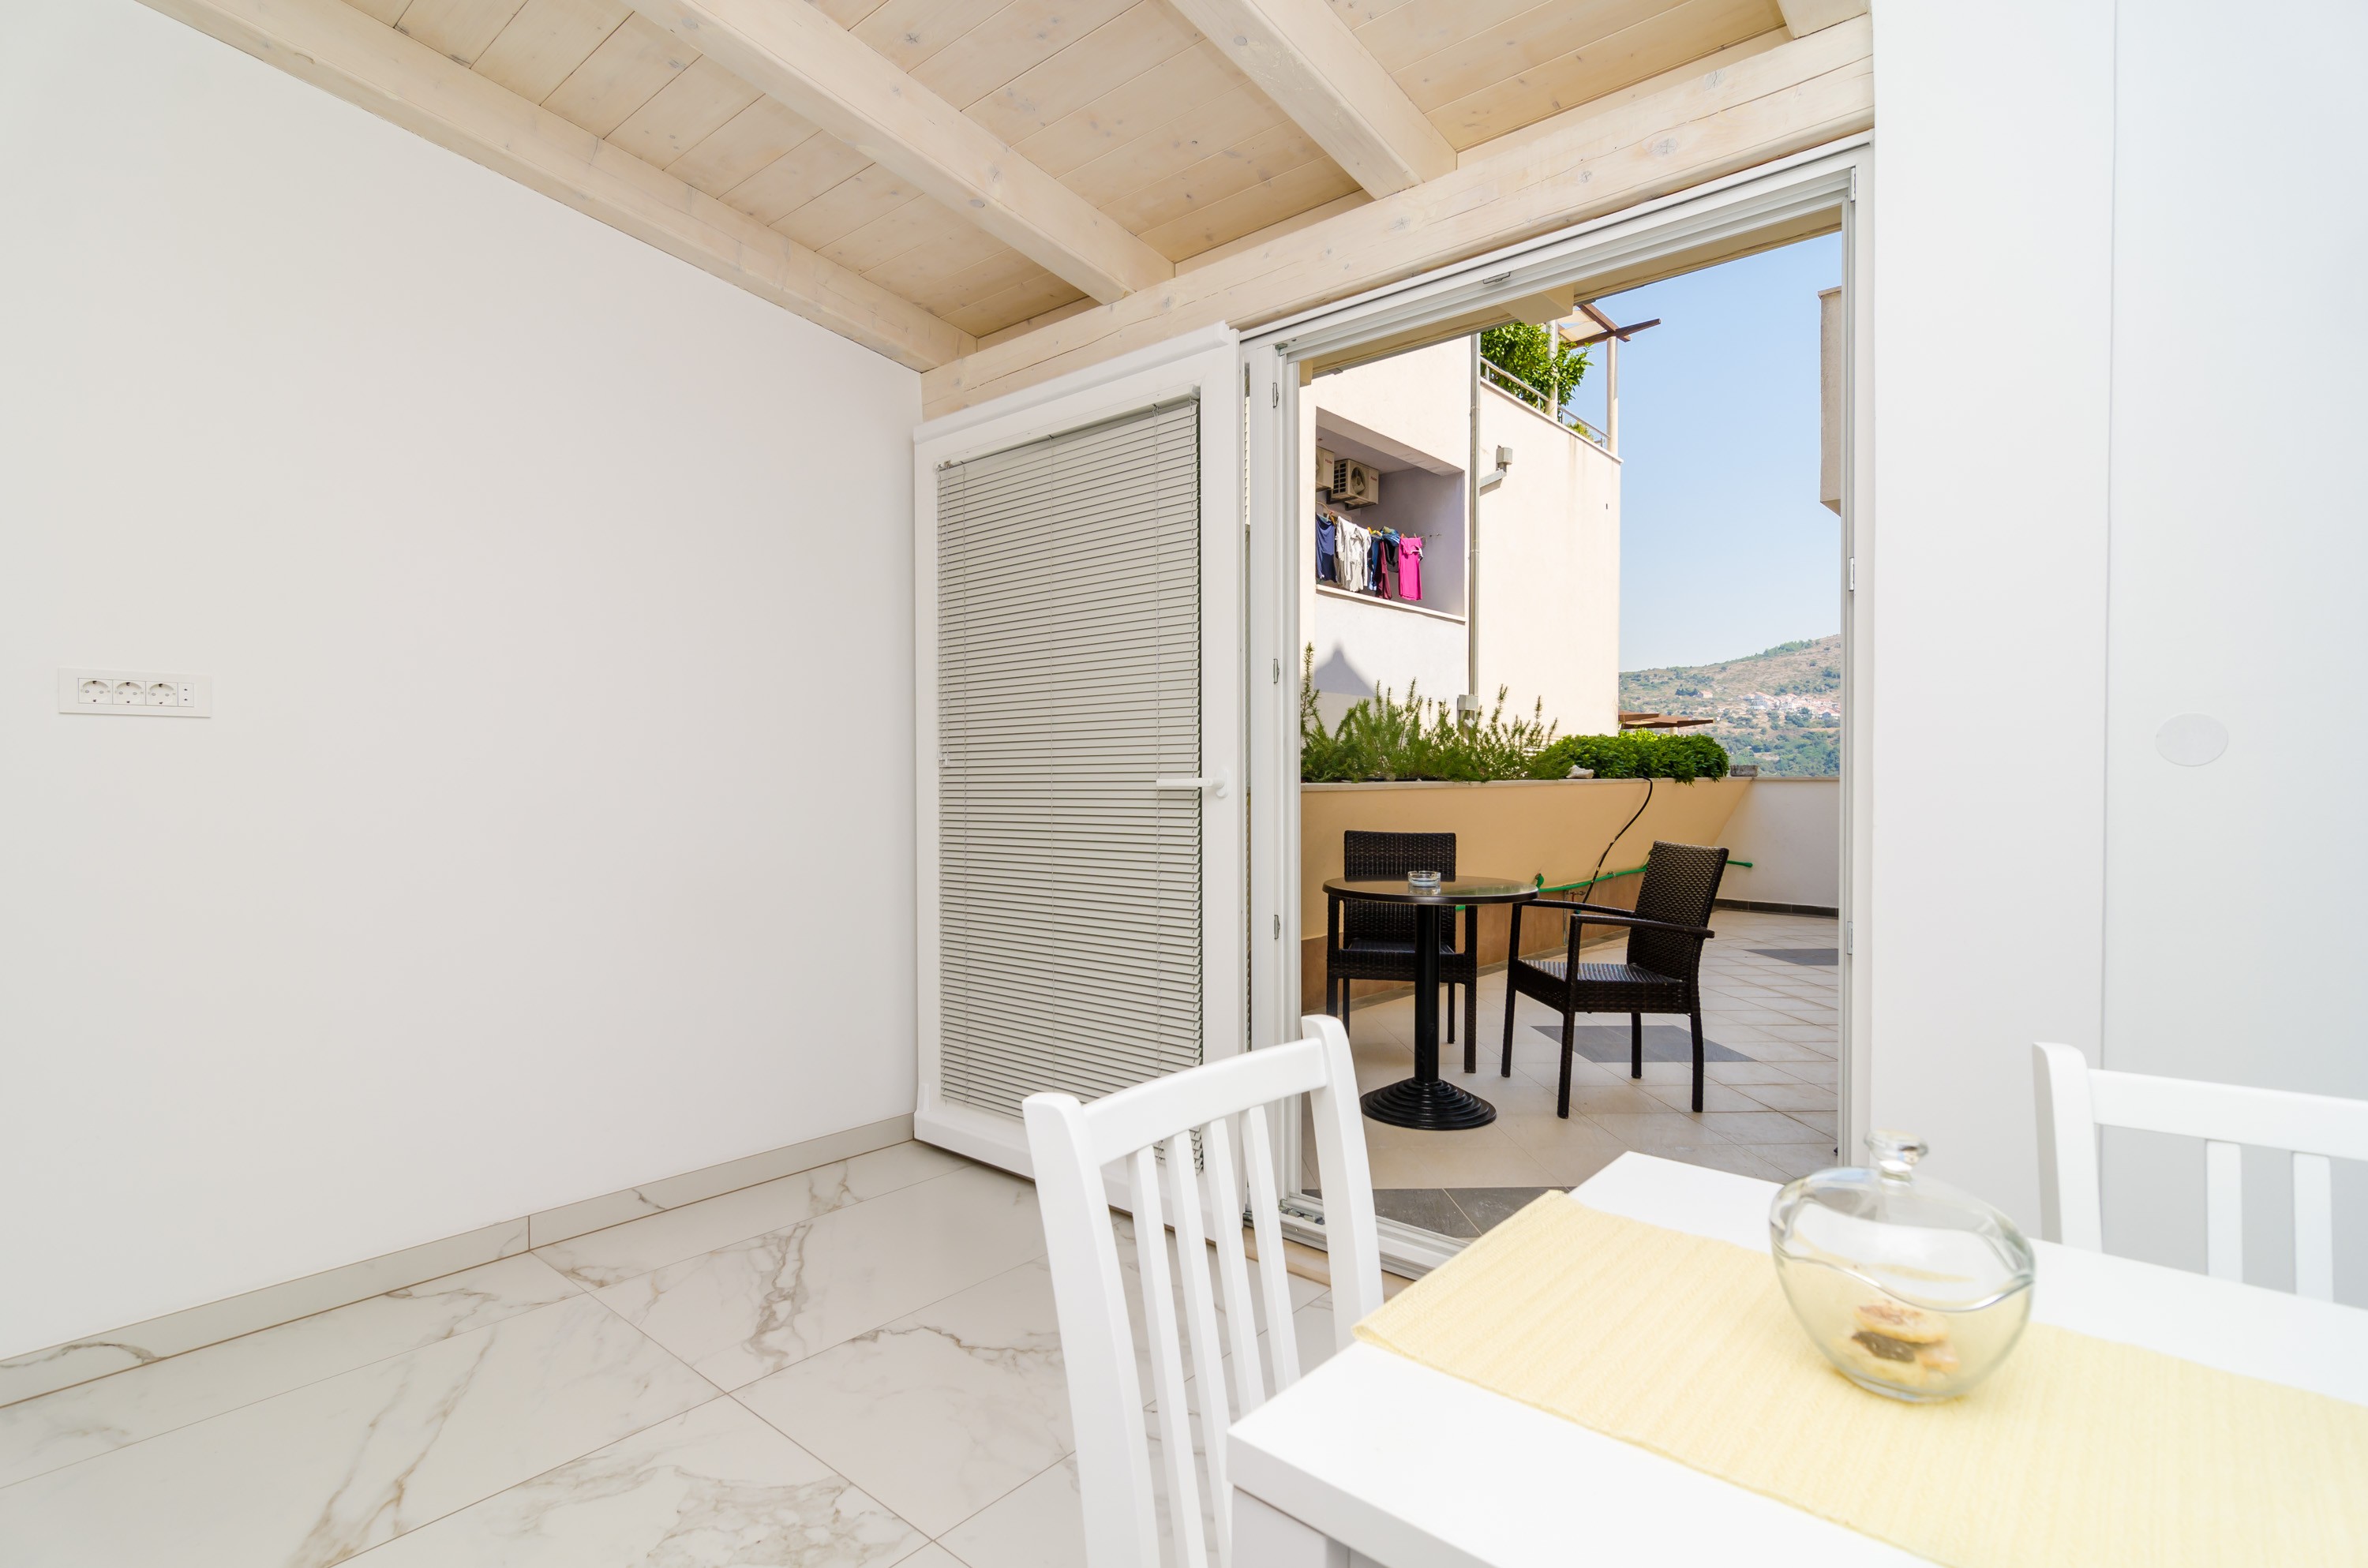 Apartment Riki - Studio Apartment with Balcony and   Dubrovnik